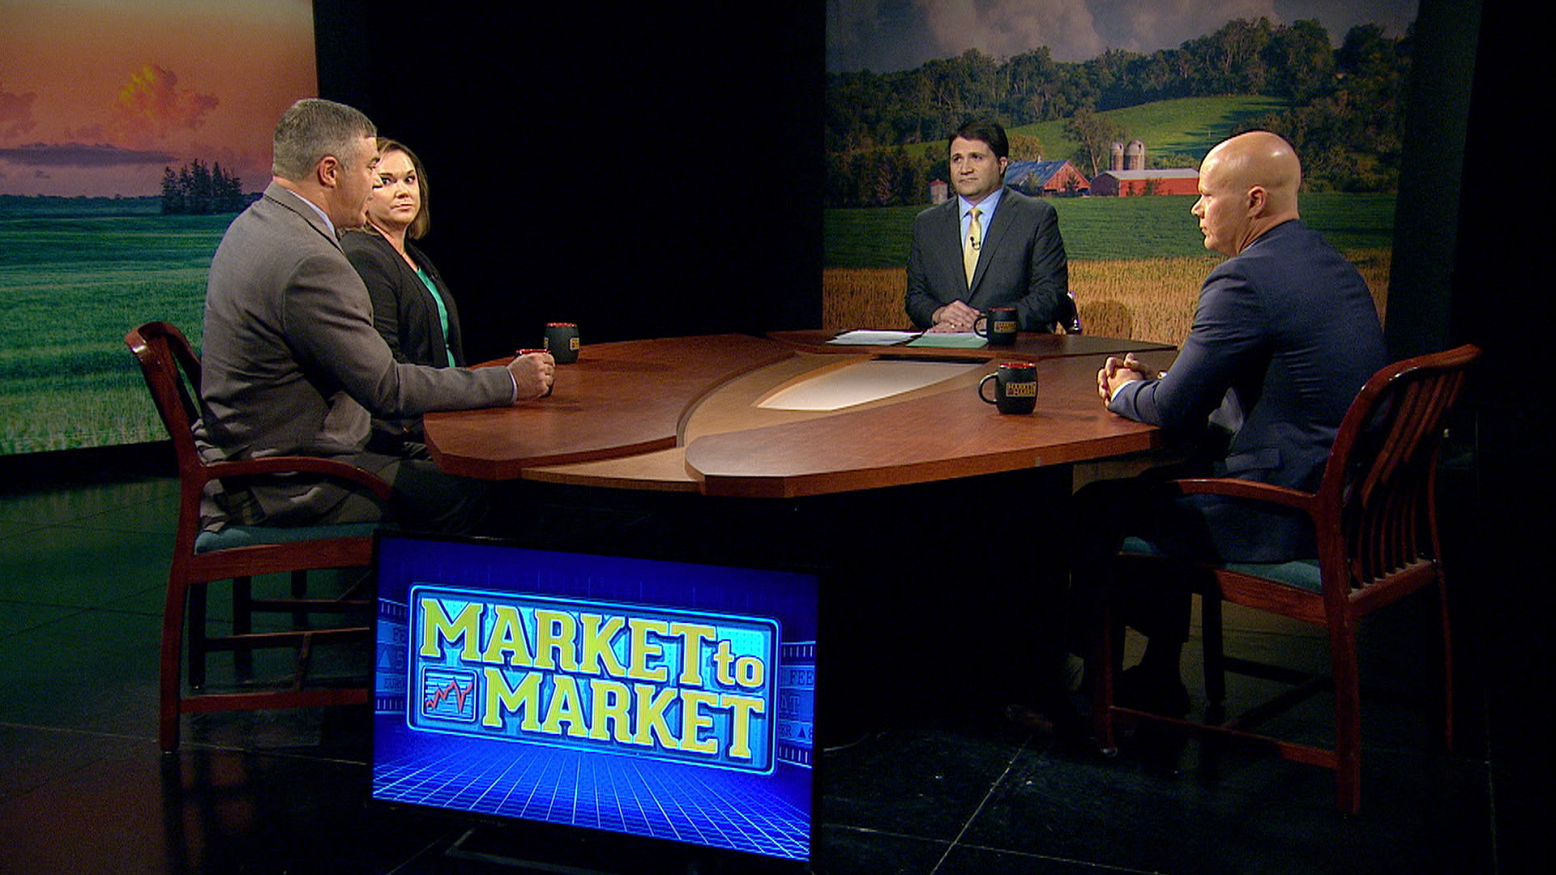 Ted Seifried, Naomi Blohm, and Matt Bennett join Paul Yeager to discuss the latest commodity market news